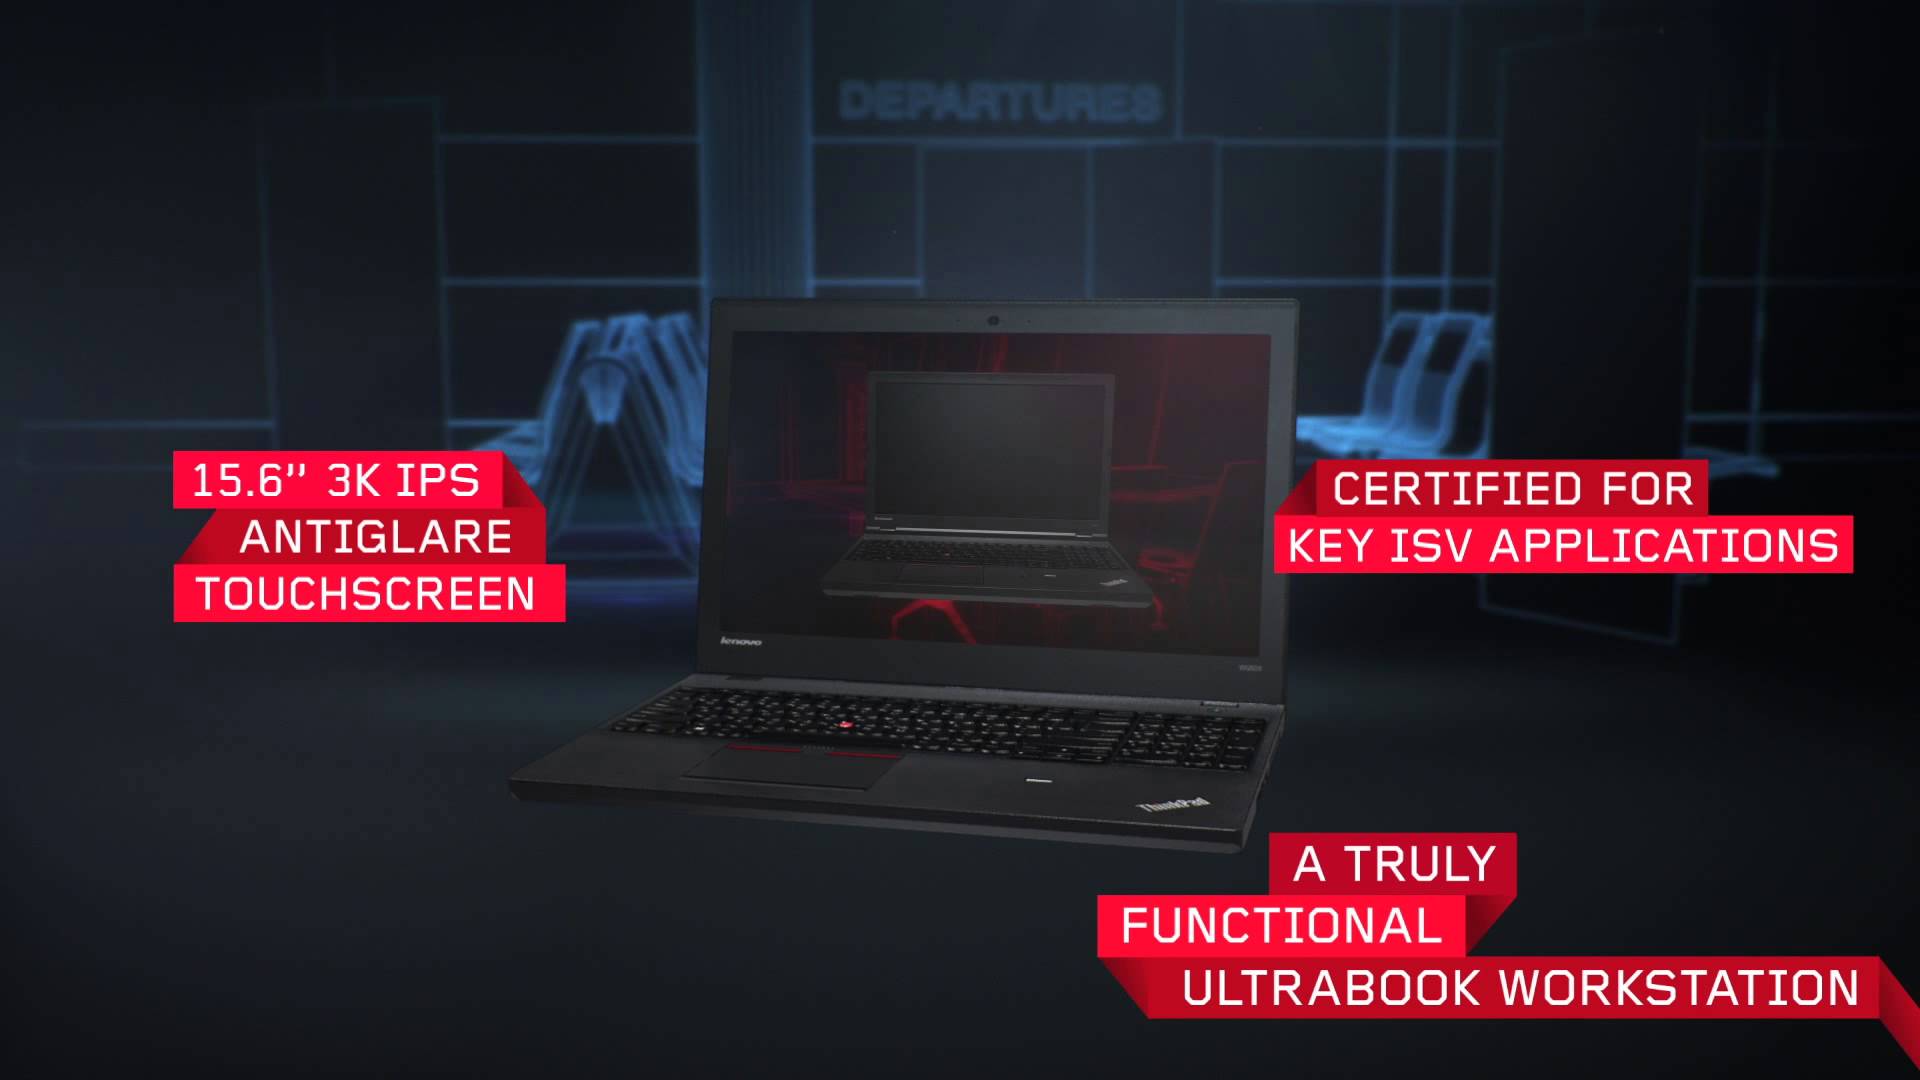 Lenovo S New Thinkpad Workstation Laptops Target Designers And Engineers